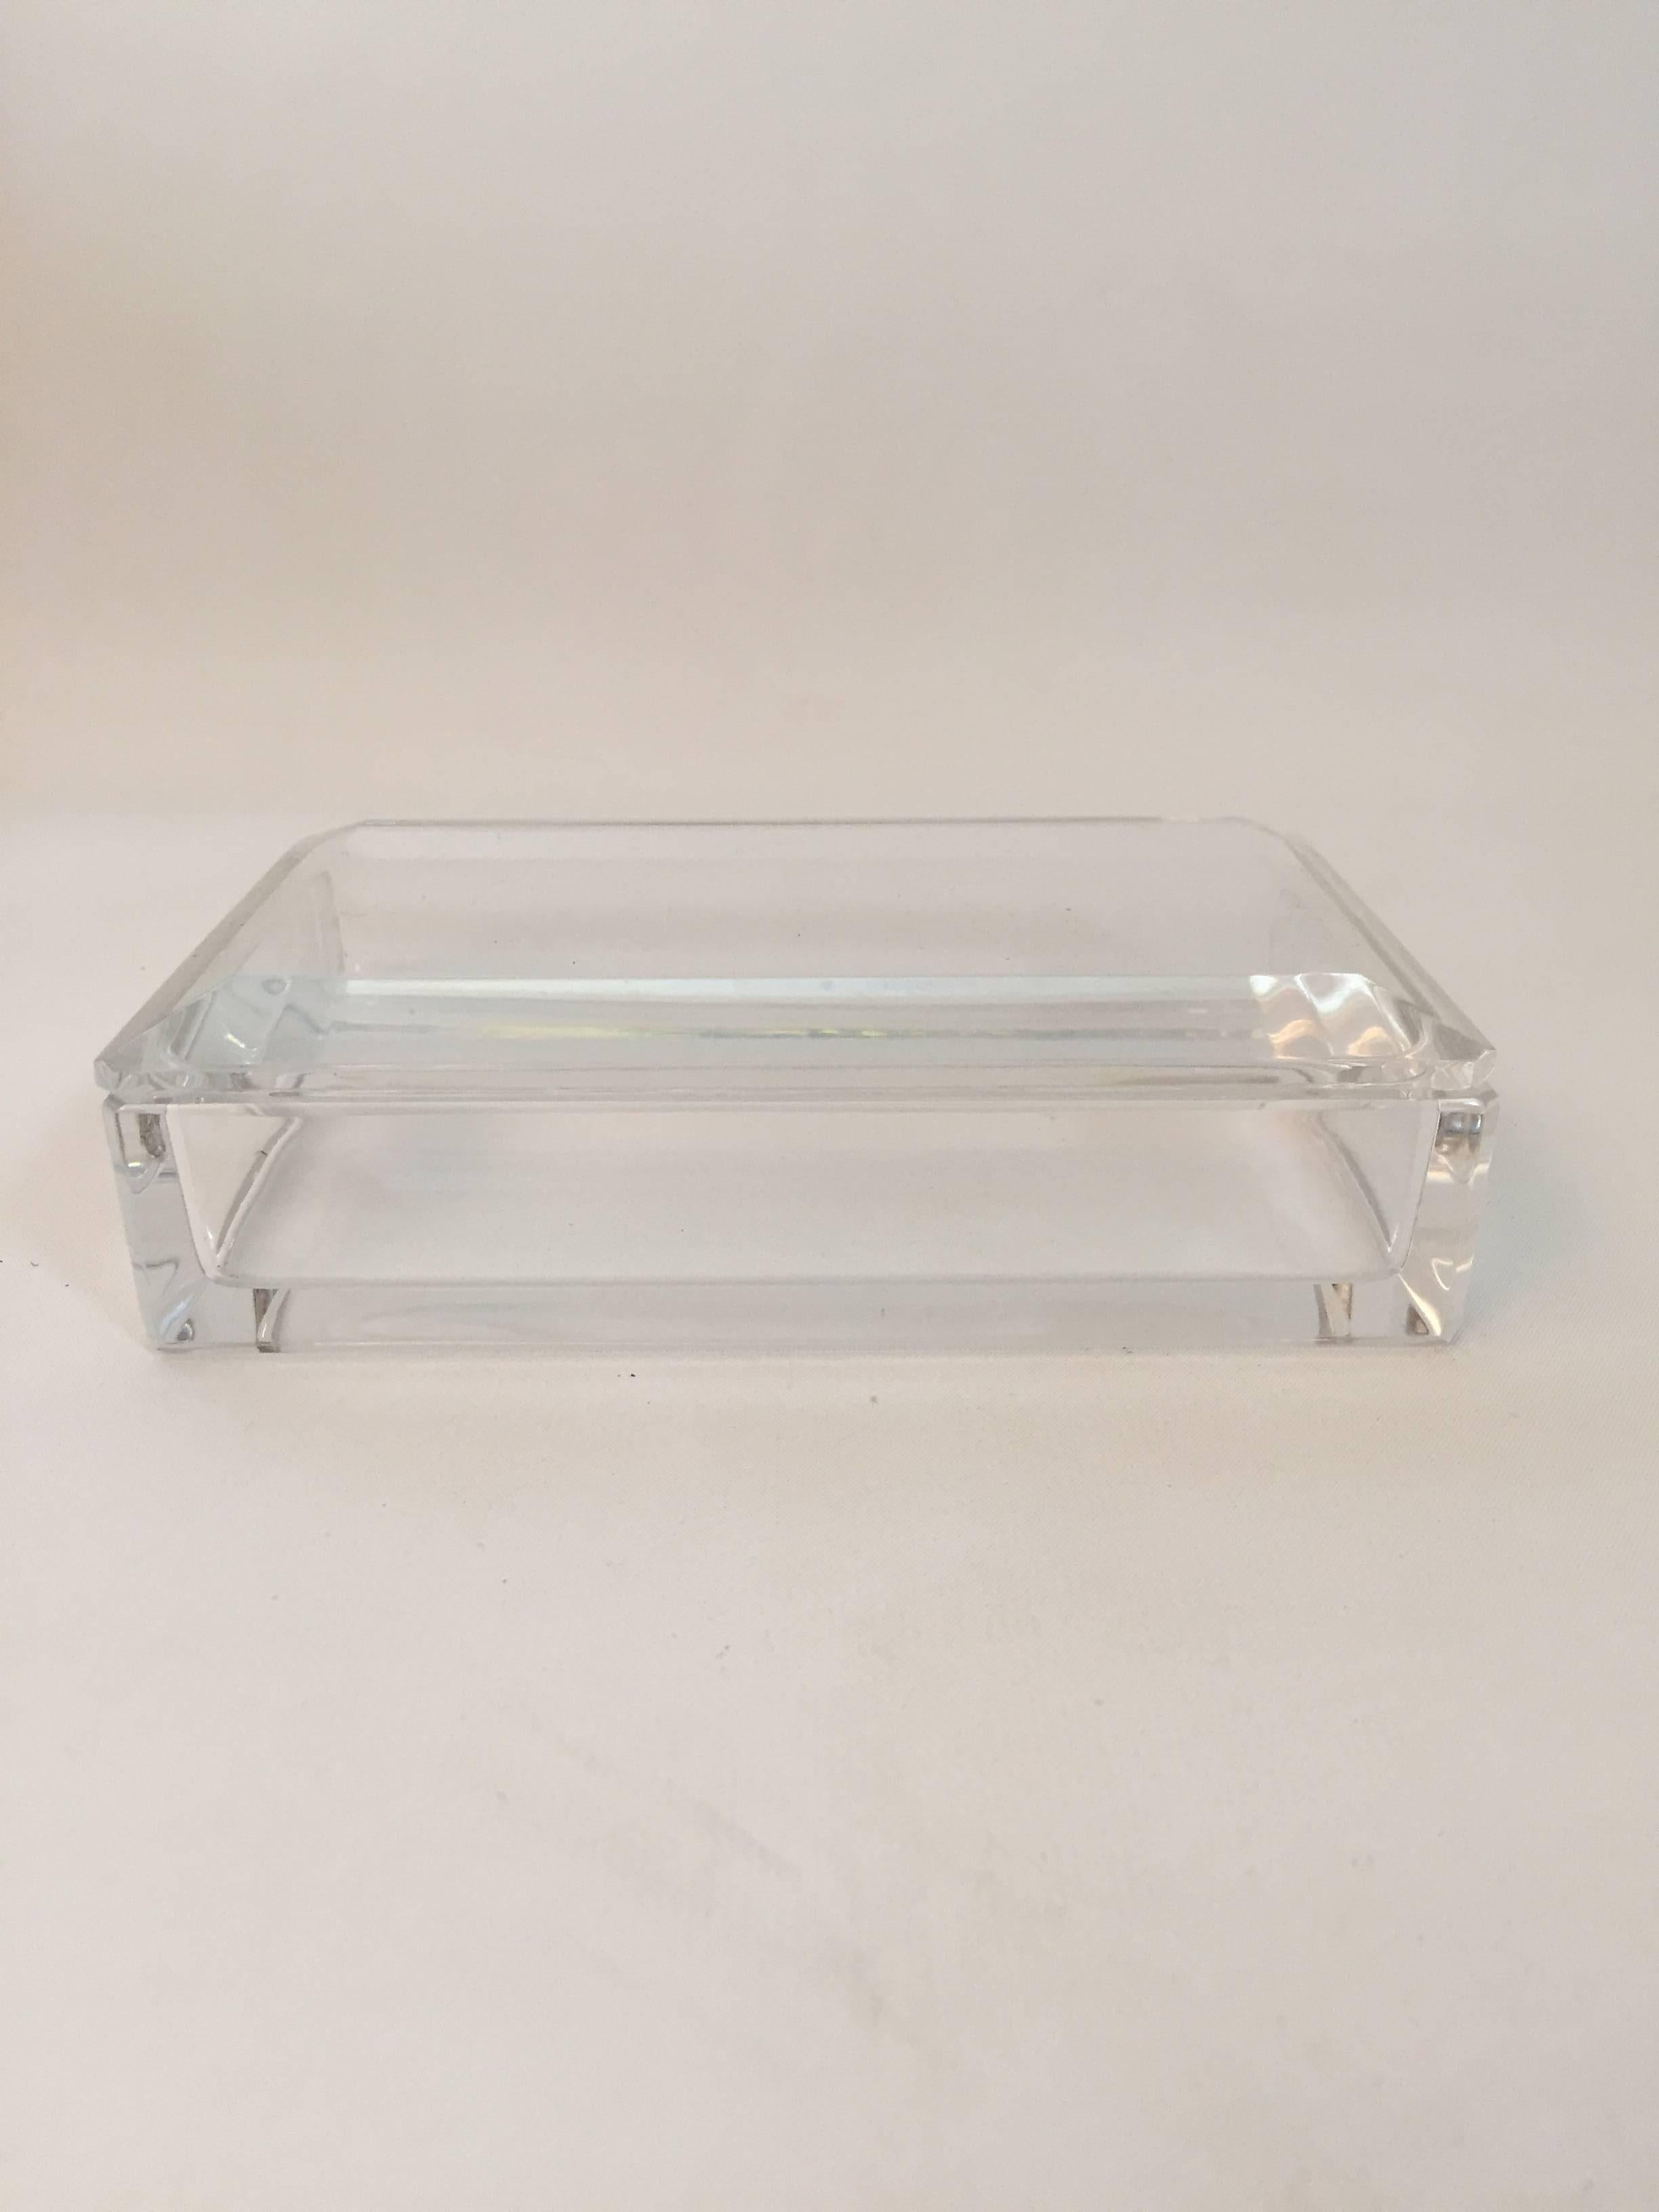 Signed Val St. Lambert crystal box. Val Saint Lambert based in Seraing, Belgium in 1826. Clipped corners and bevelled edges polished to perfect. Simple and elegant design. Excellent original condition, circa 1970. Fully signed with acid stamp.